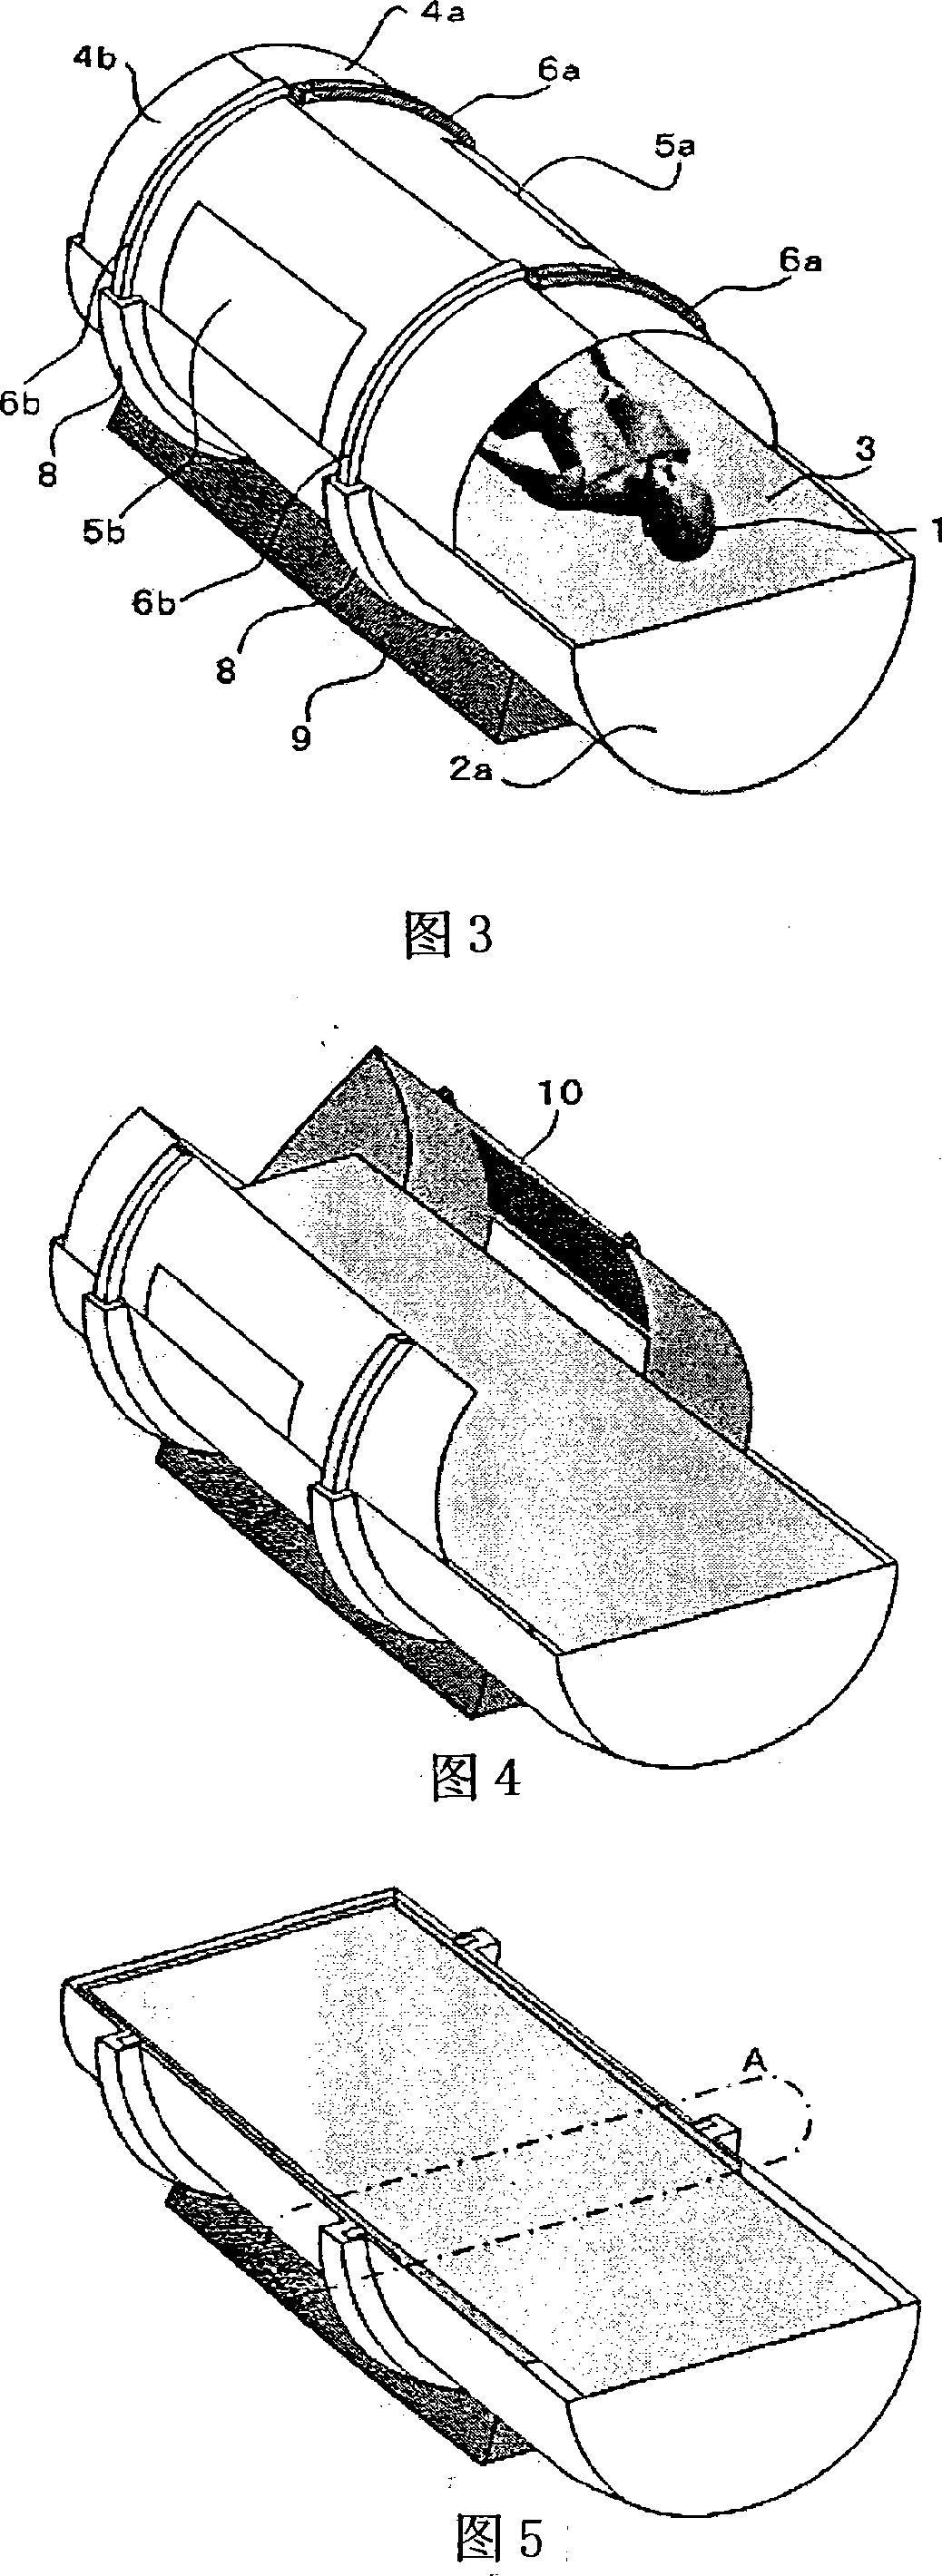 Device for heating human body